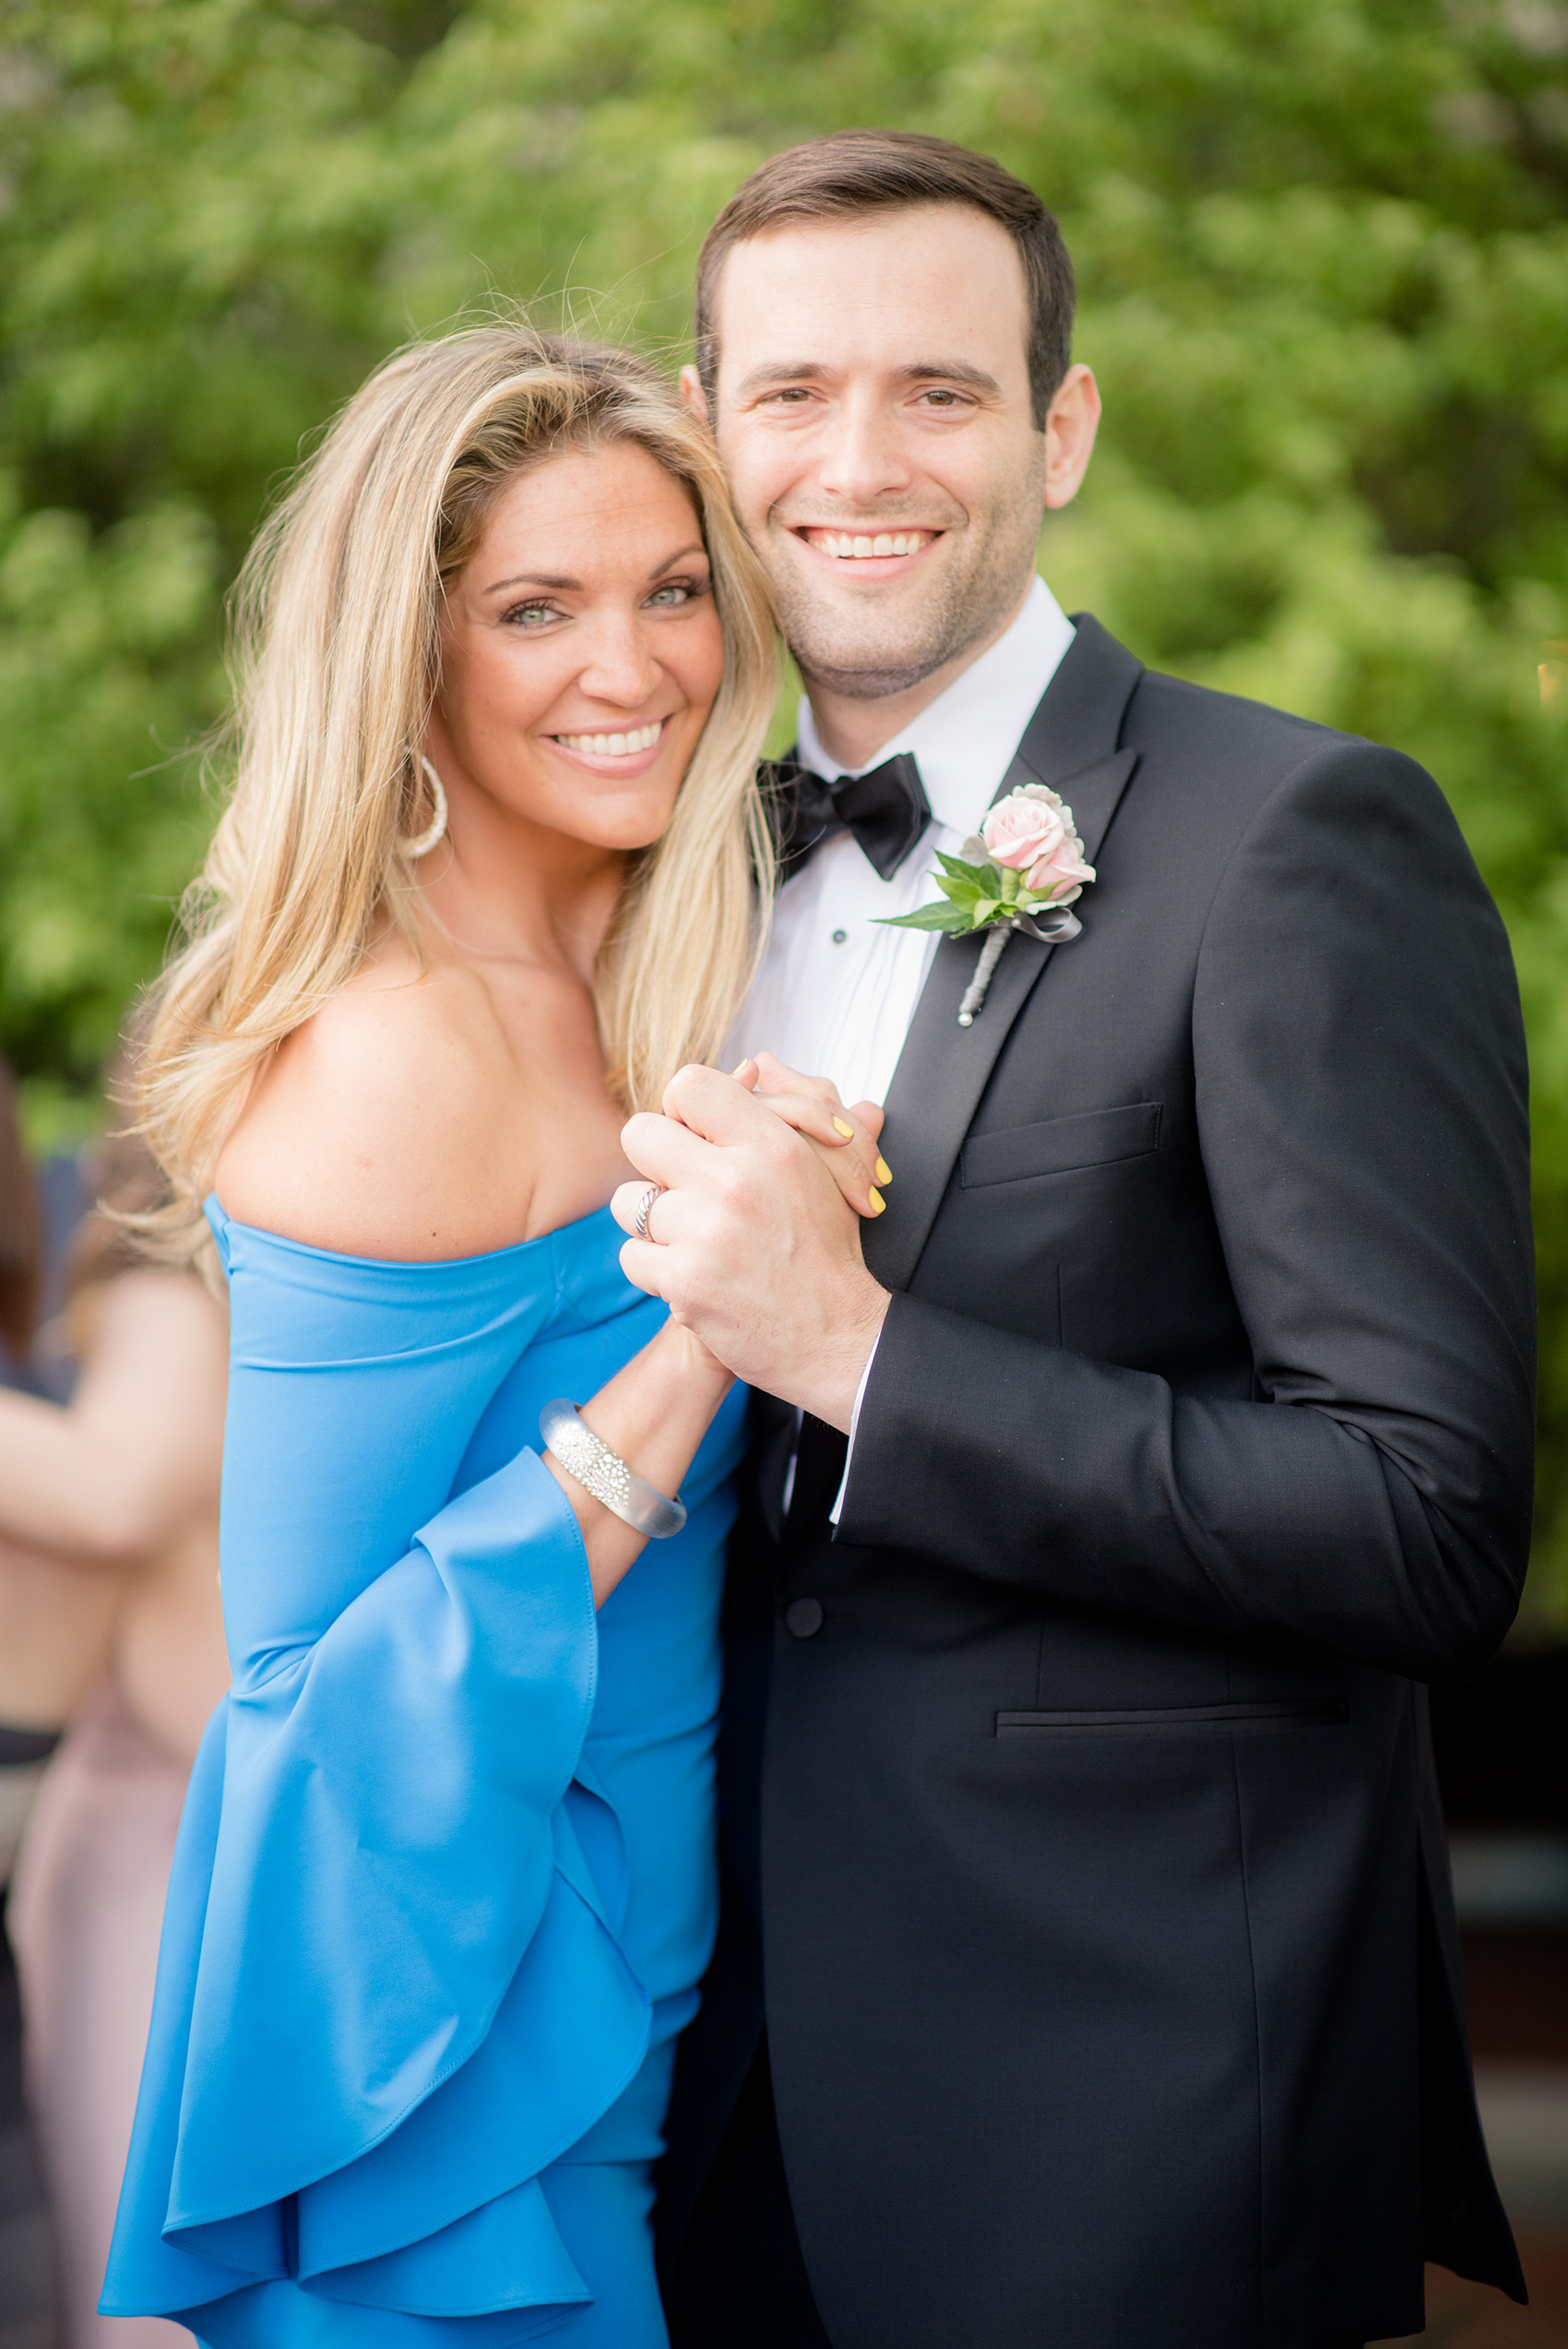 Waveny House wedding photos in Connecticut by Mikkel Paige Photography. Picture of a groomsman and his wife at the reception.